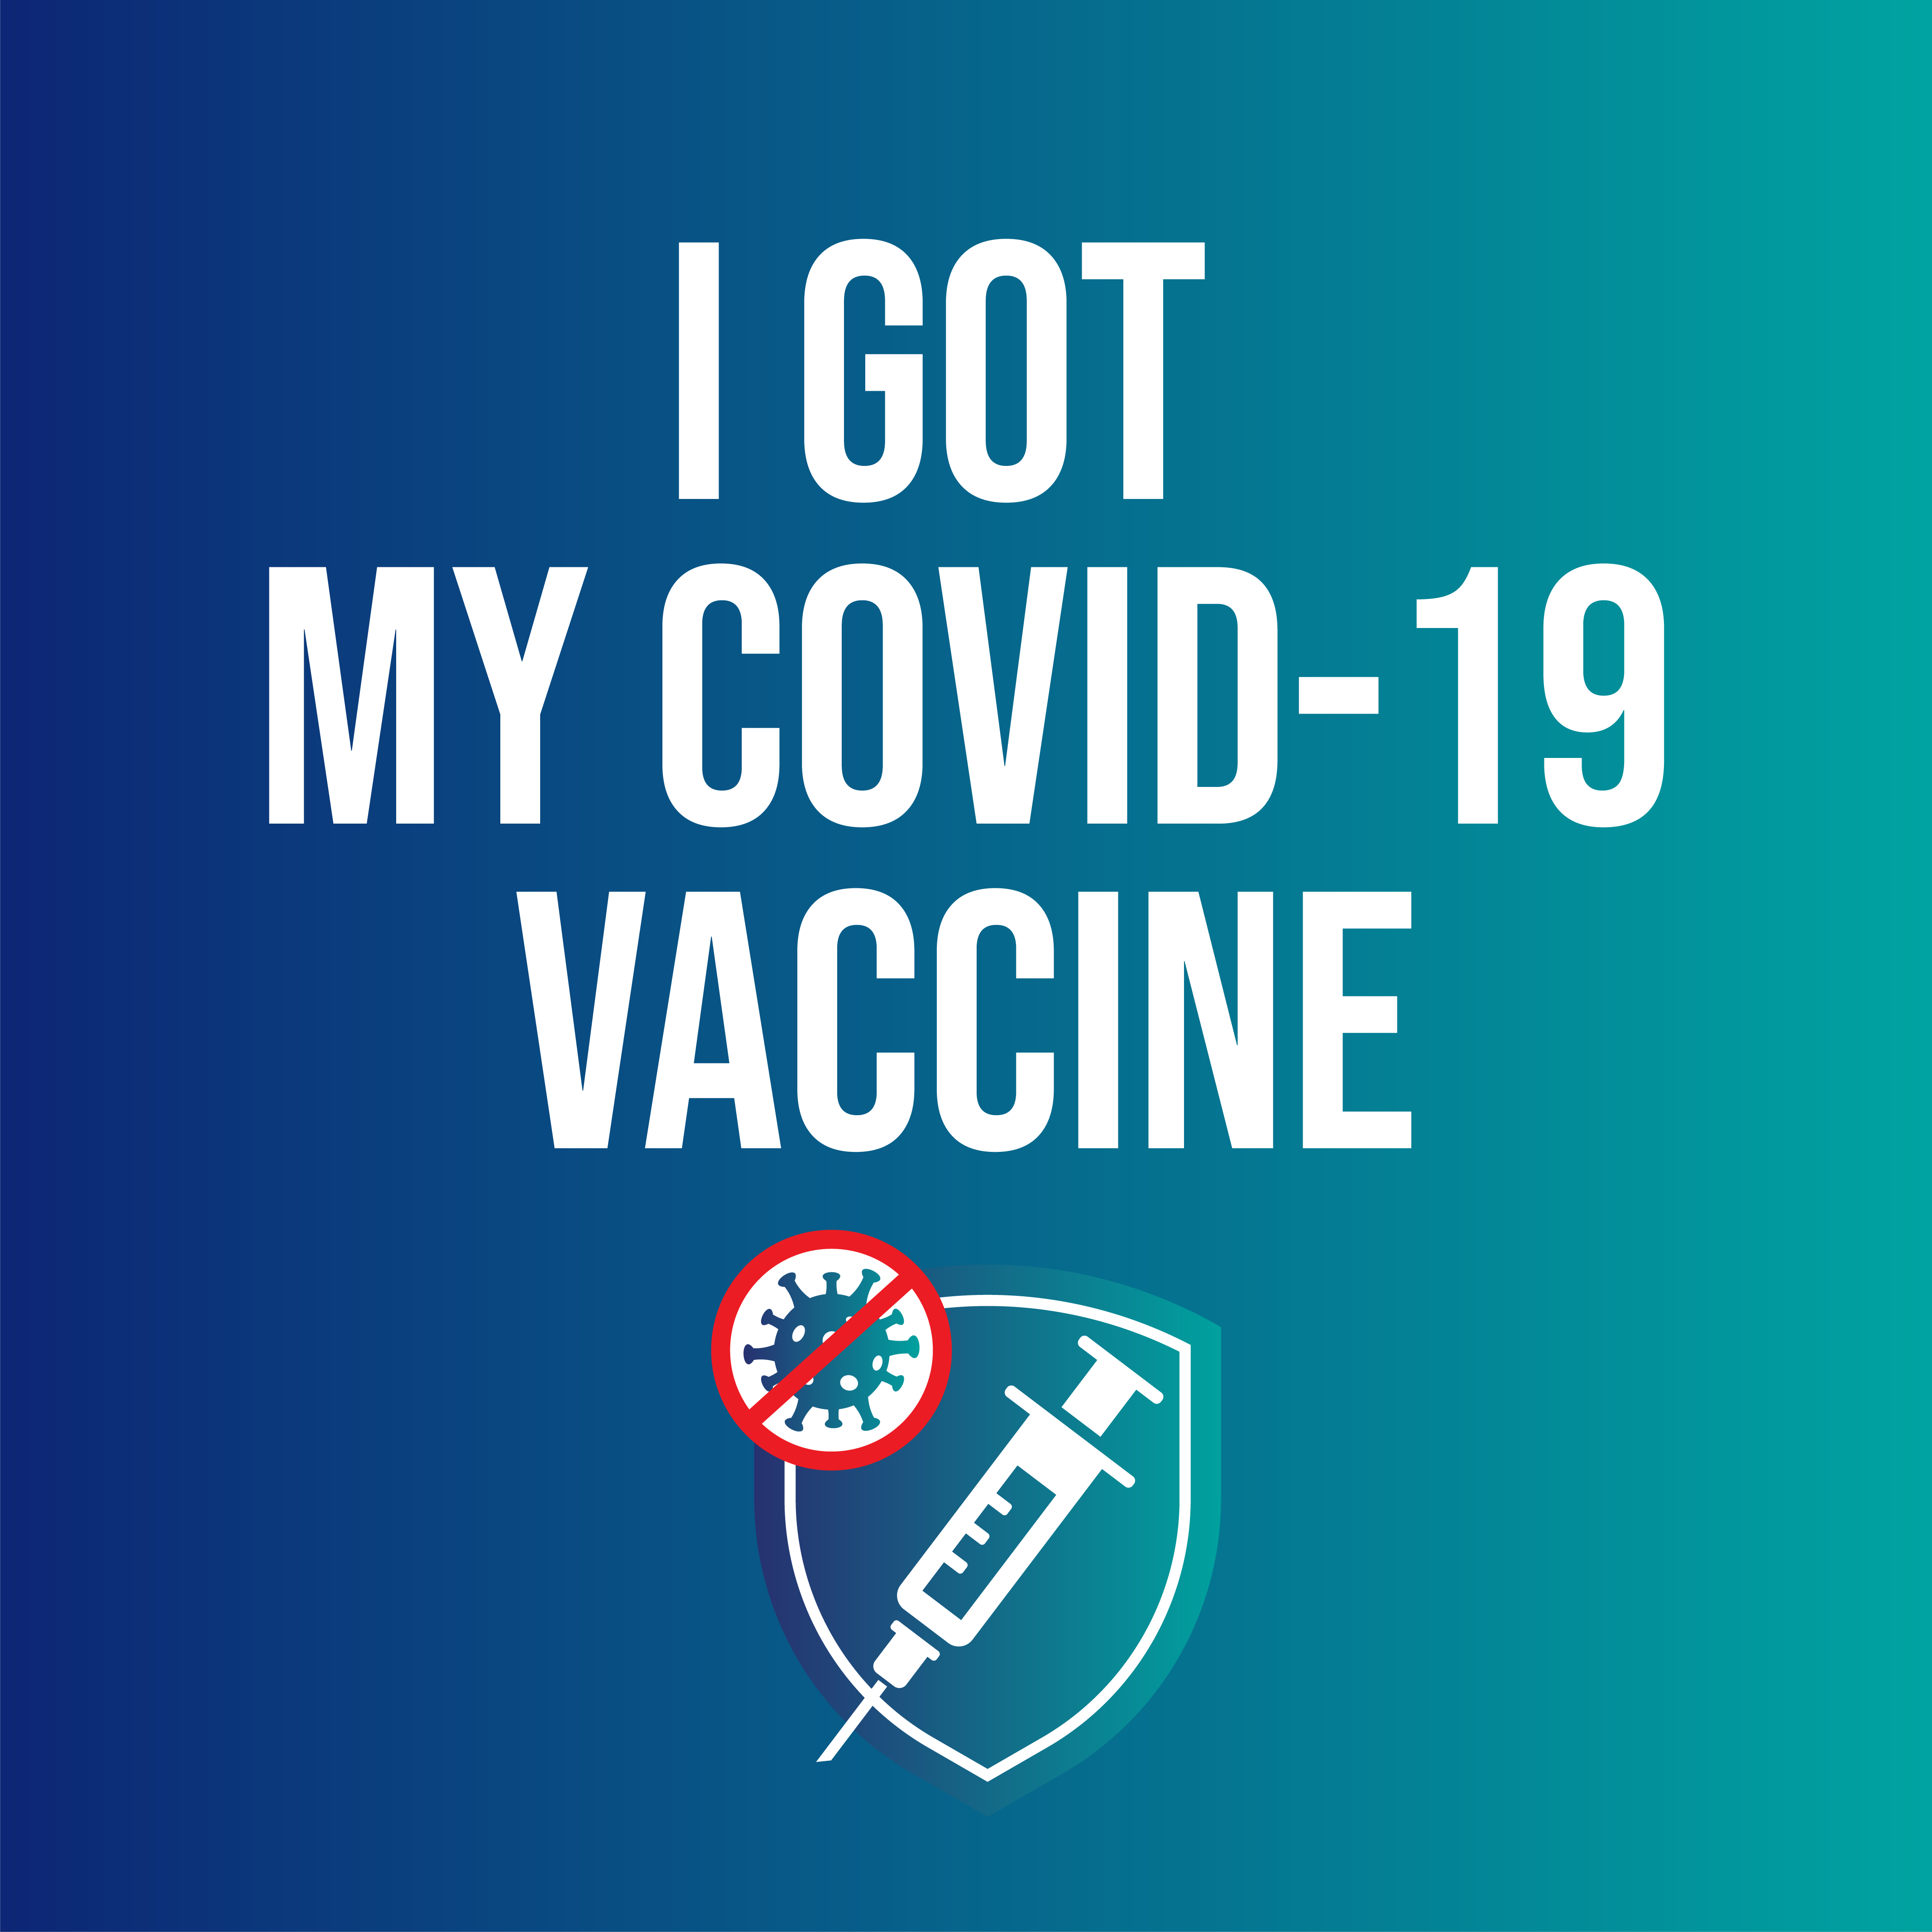 Image with a blue/green faded background that says "I Got My COVID-19 Vaccine" in white font.